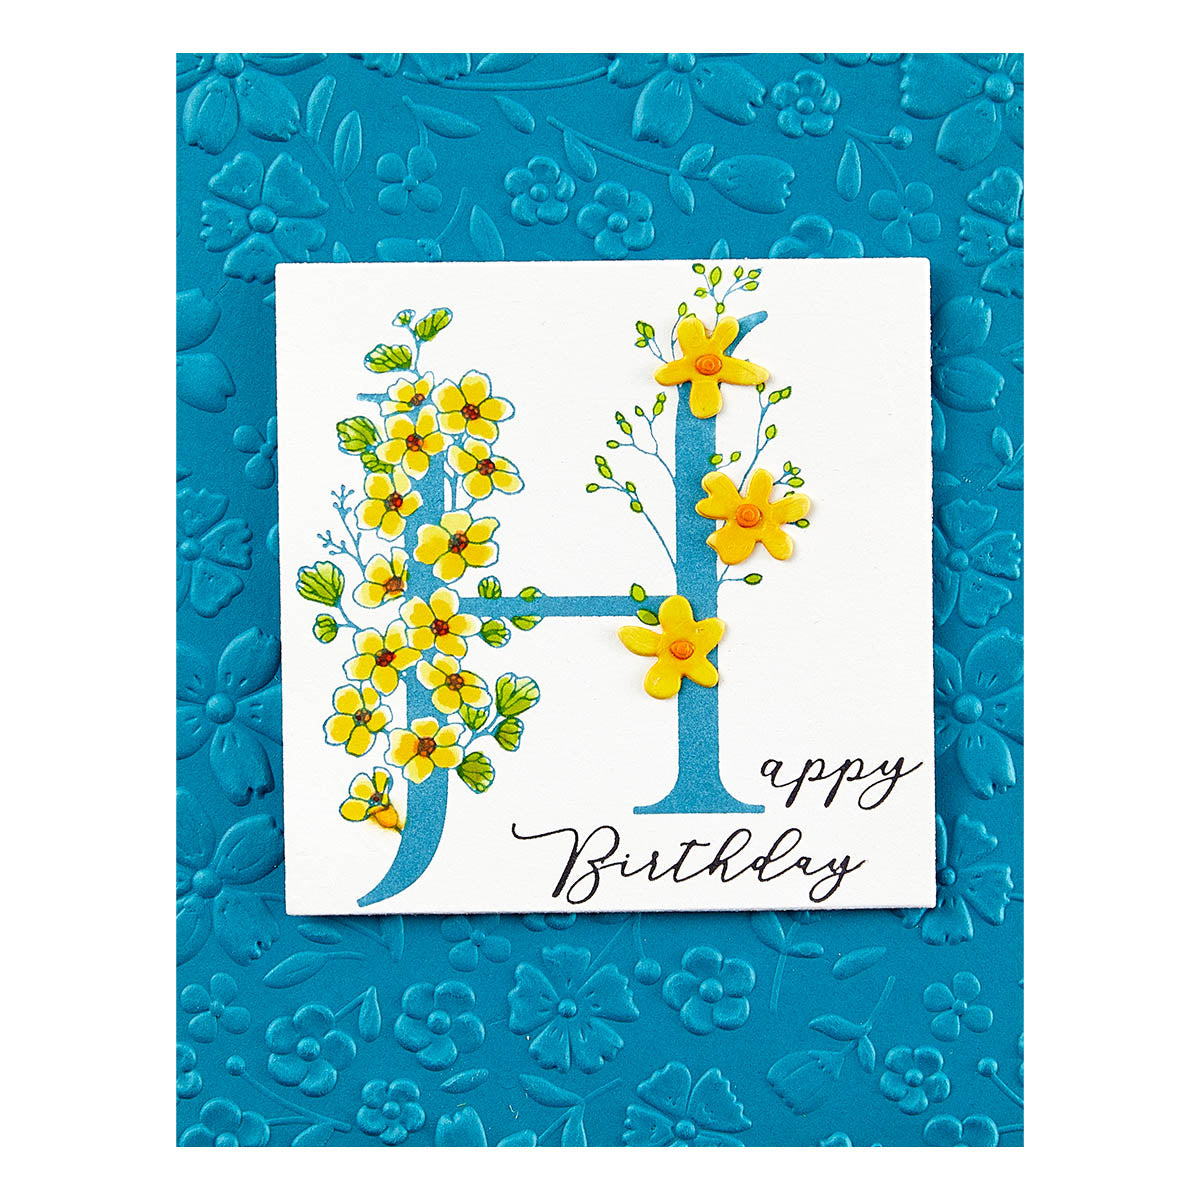 Spellbinders - Floral H and Sentiment Press Plate from the Every Occasion Floral Alphabet Collection